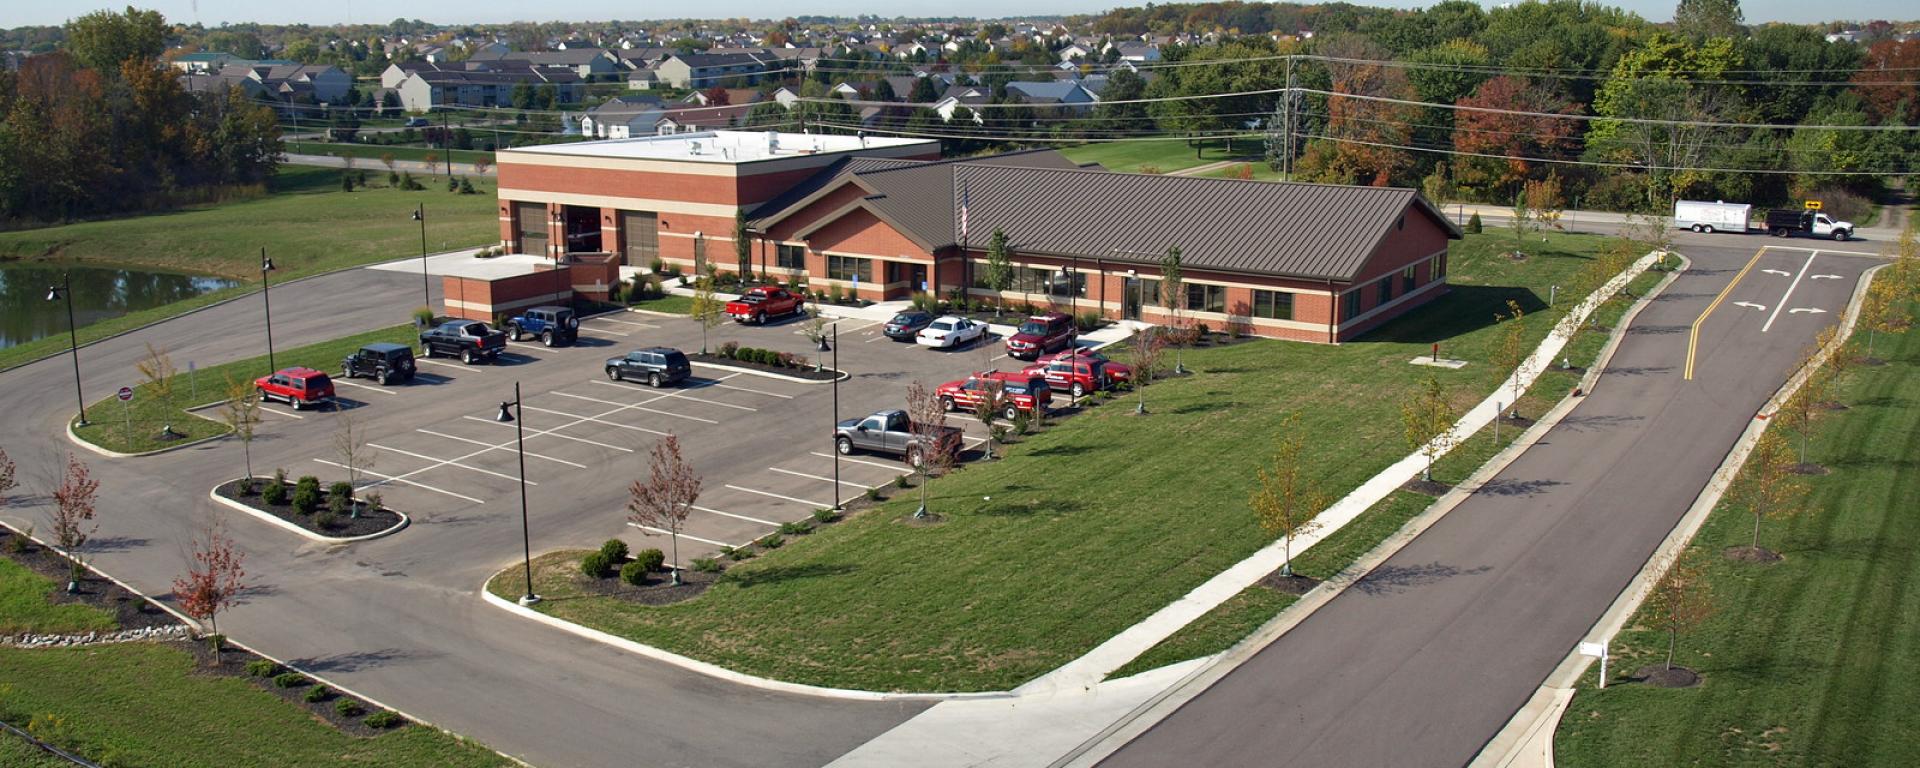 aerial of parking lot and firehouse